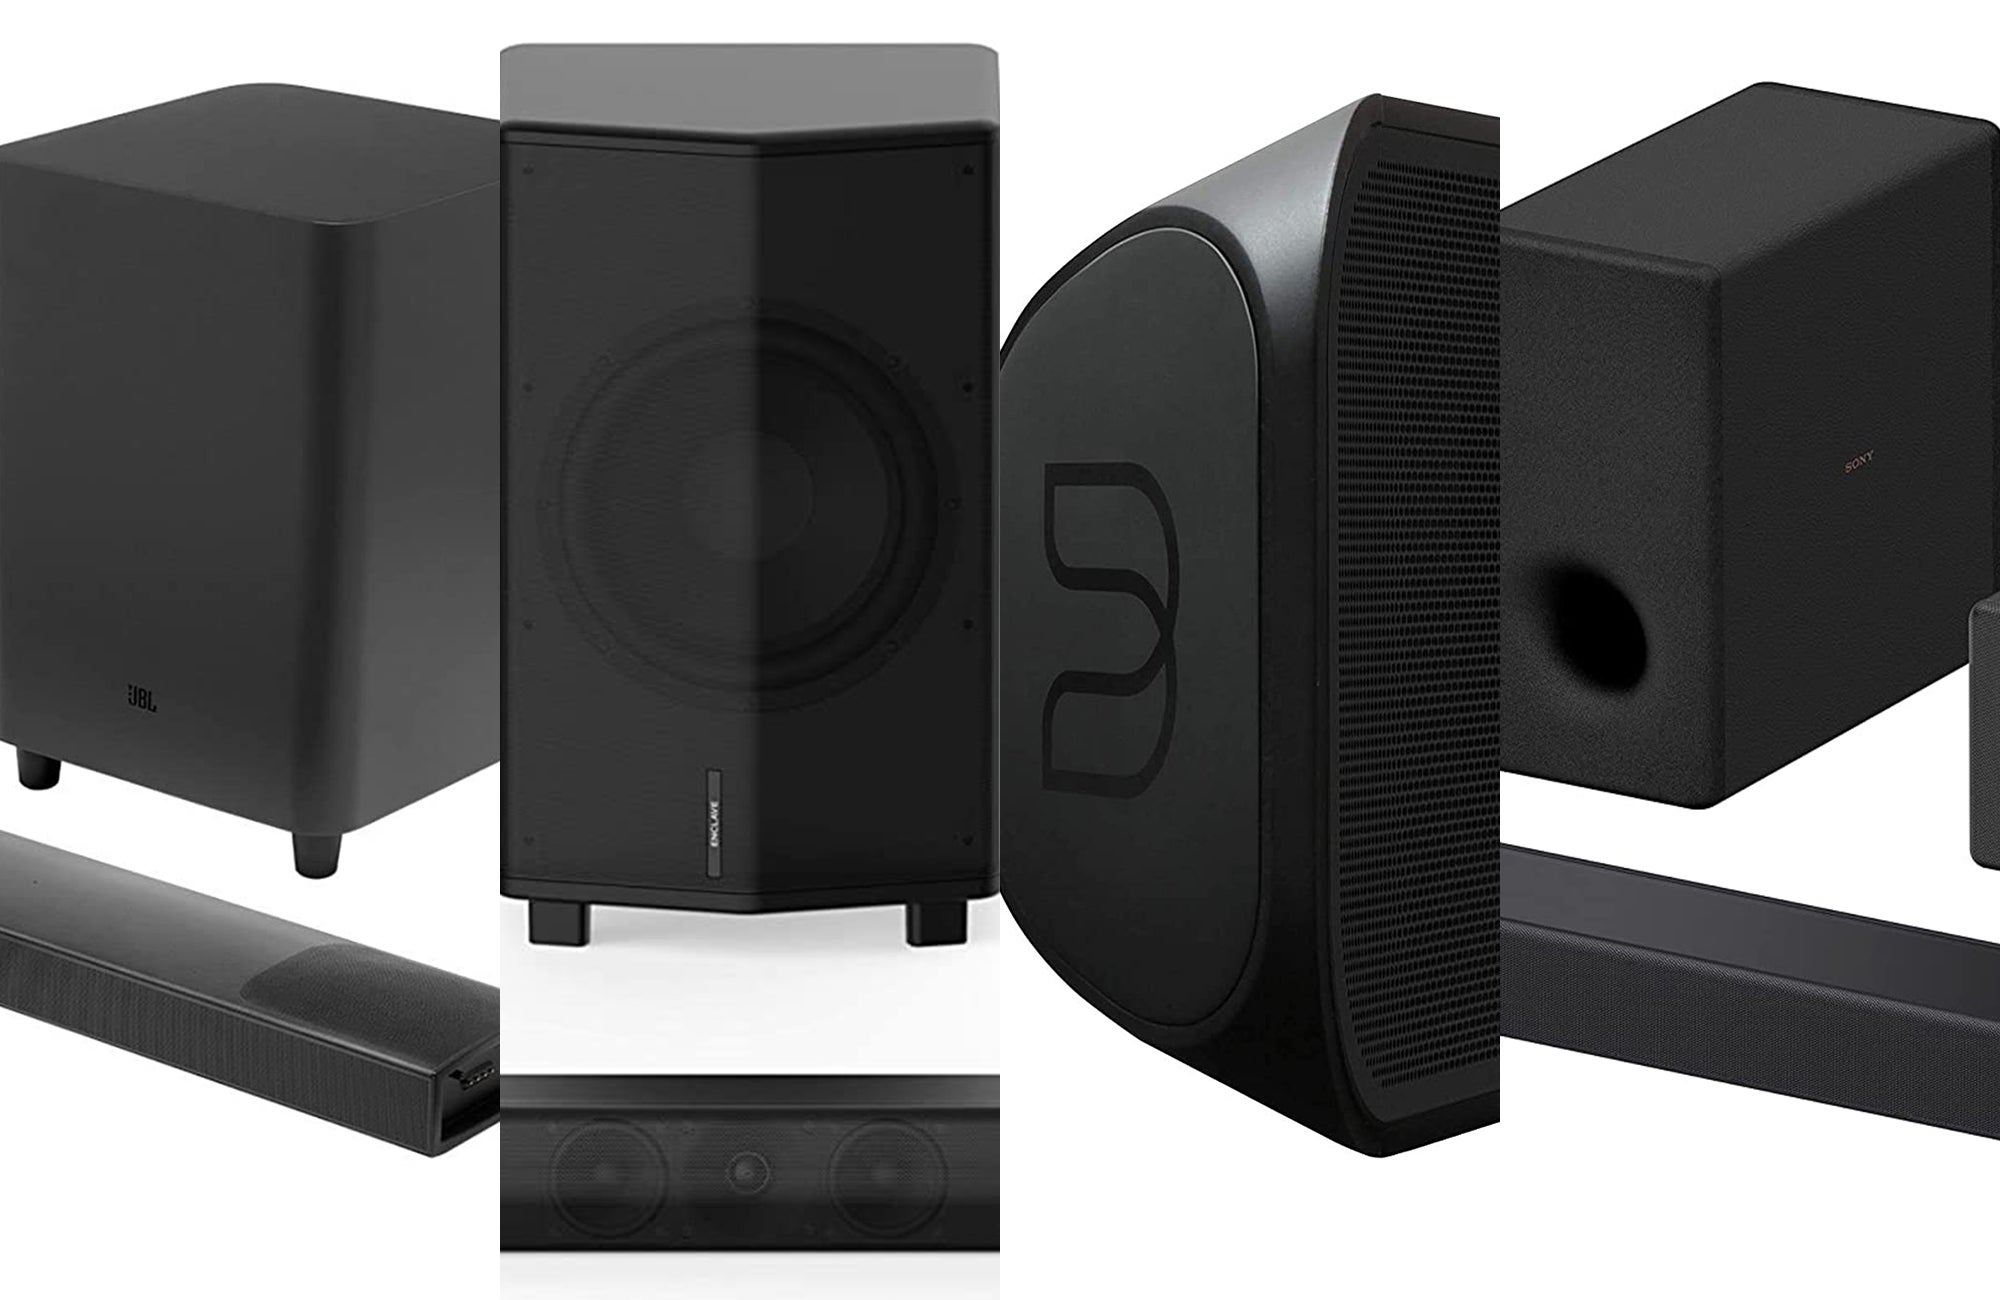 Surround Sound Channels Explained: 2.1, 5.1, 7.1, 9.1, And More!